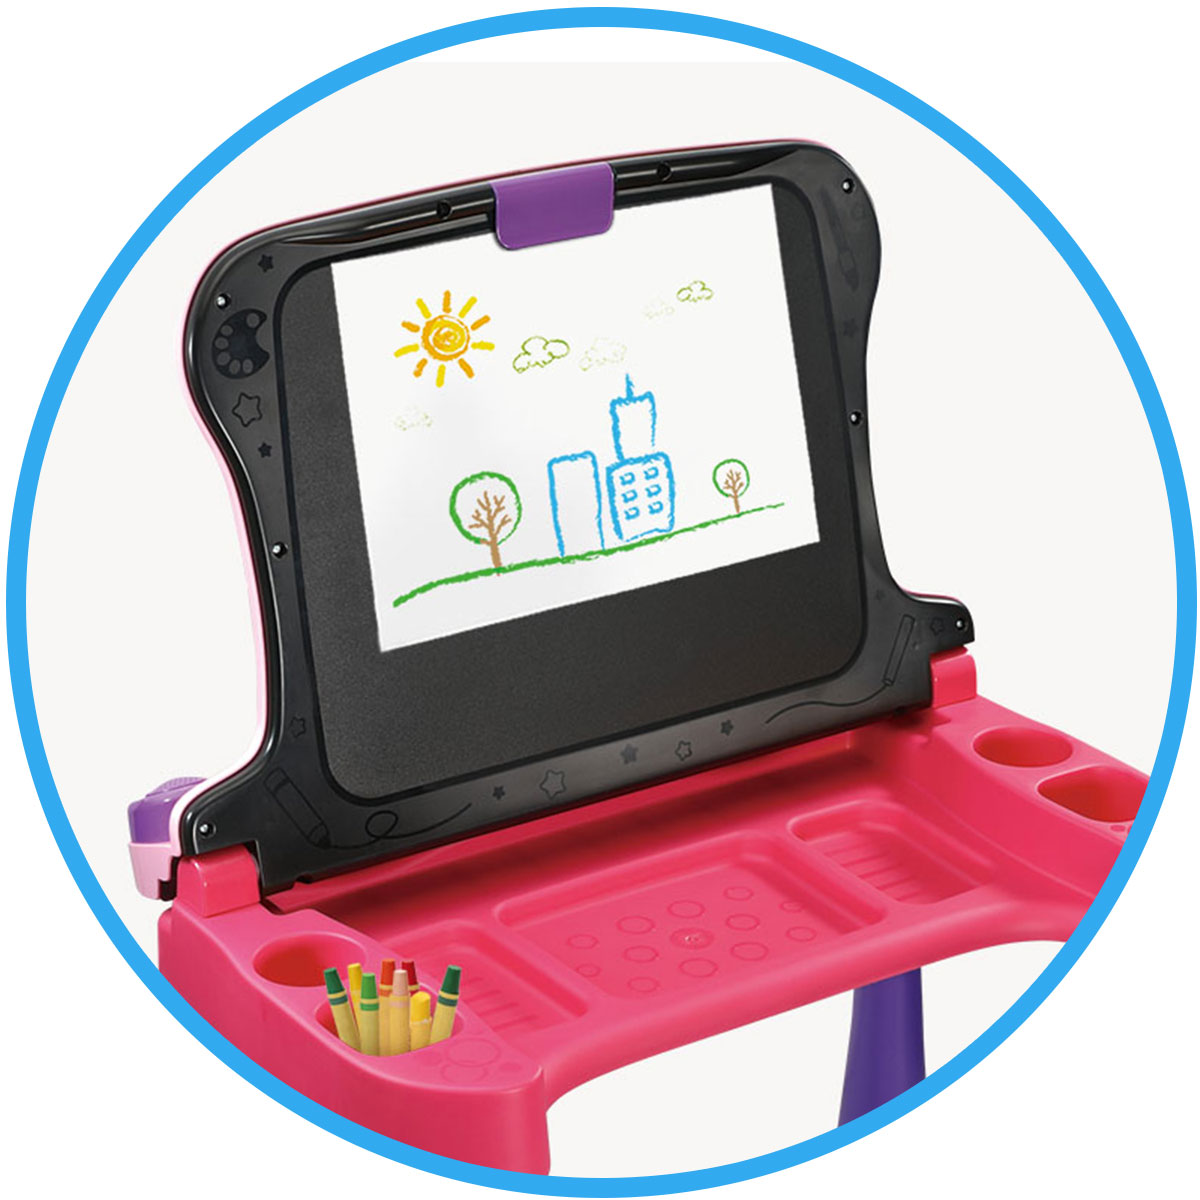 The Amazing Activity Writing Board™, Assistive Technology, The Amazing  Activity Writing Board™ from Therapy Shoppe Amazing Activity Writing Board, Lap Board-Tray